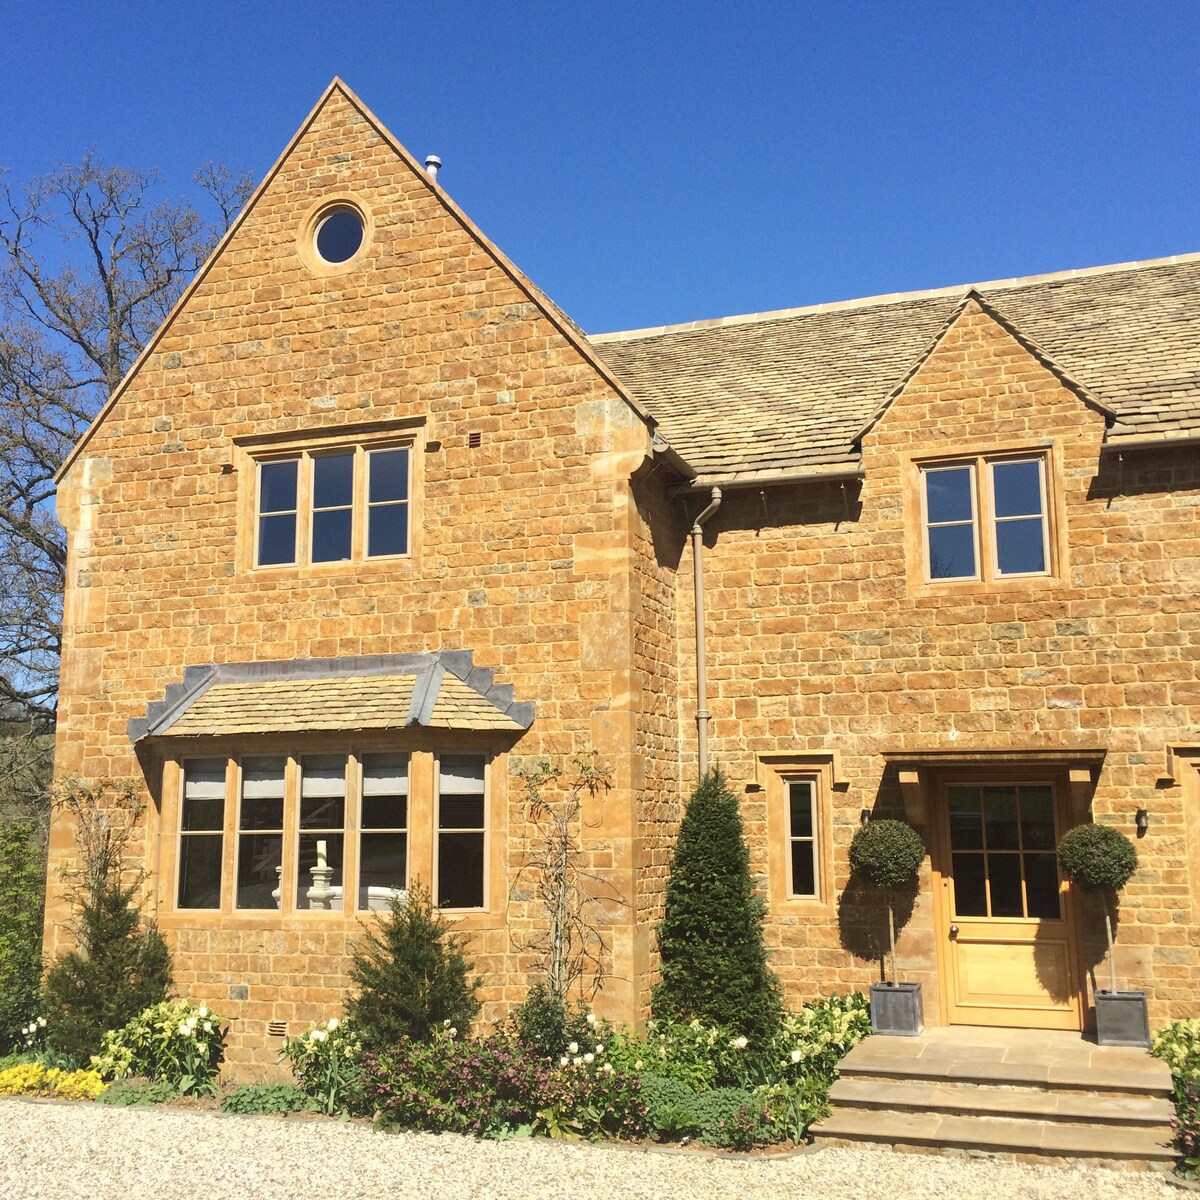 Secluded Cotswolds home near Chipping Norton